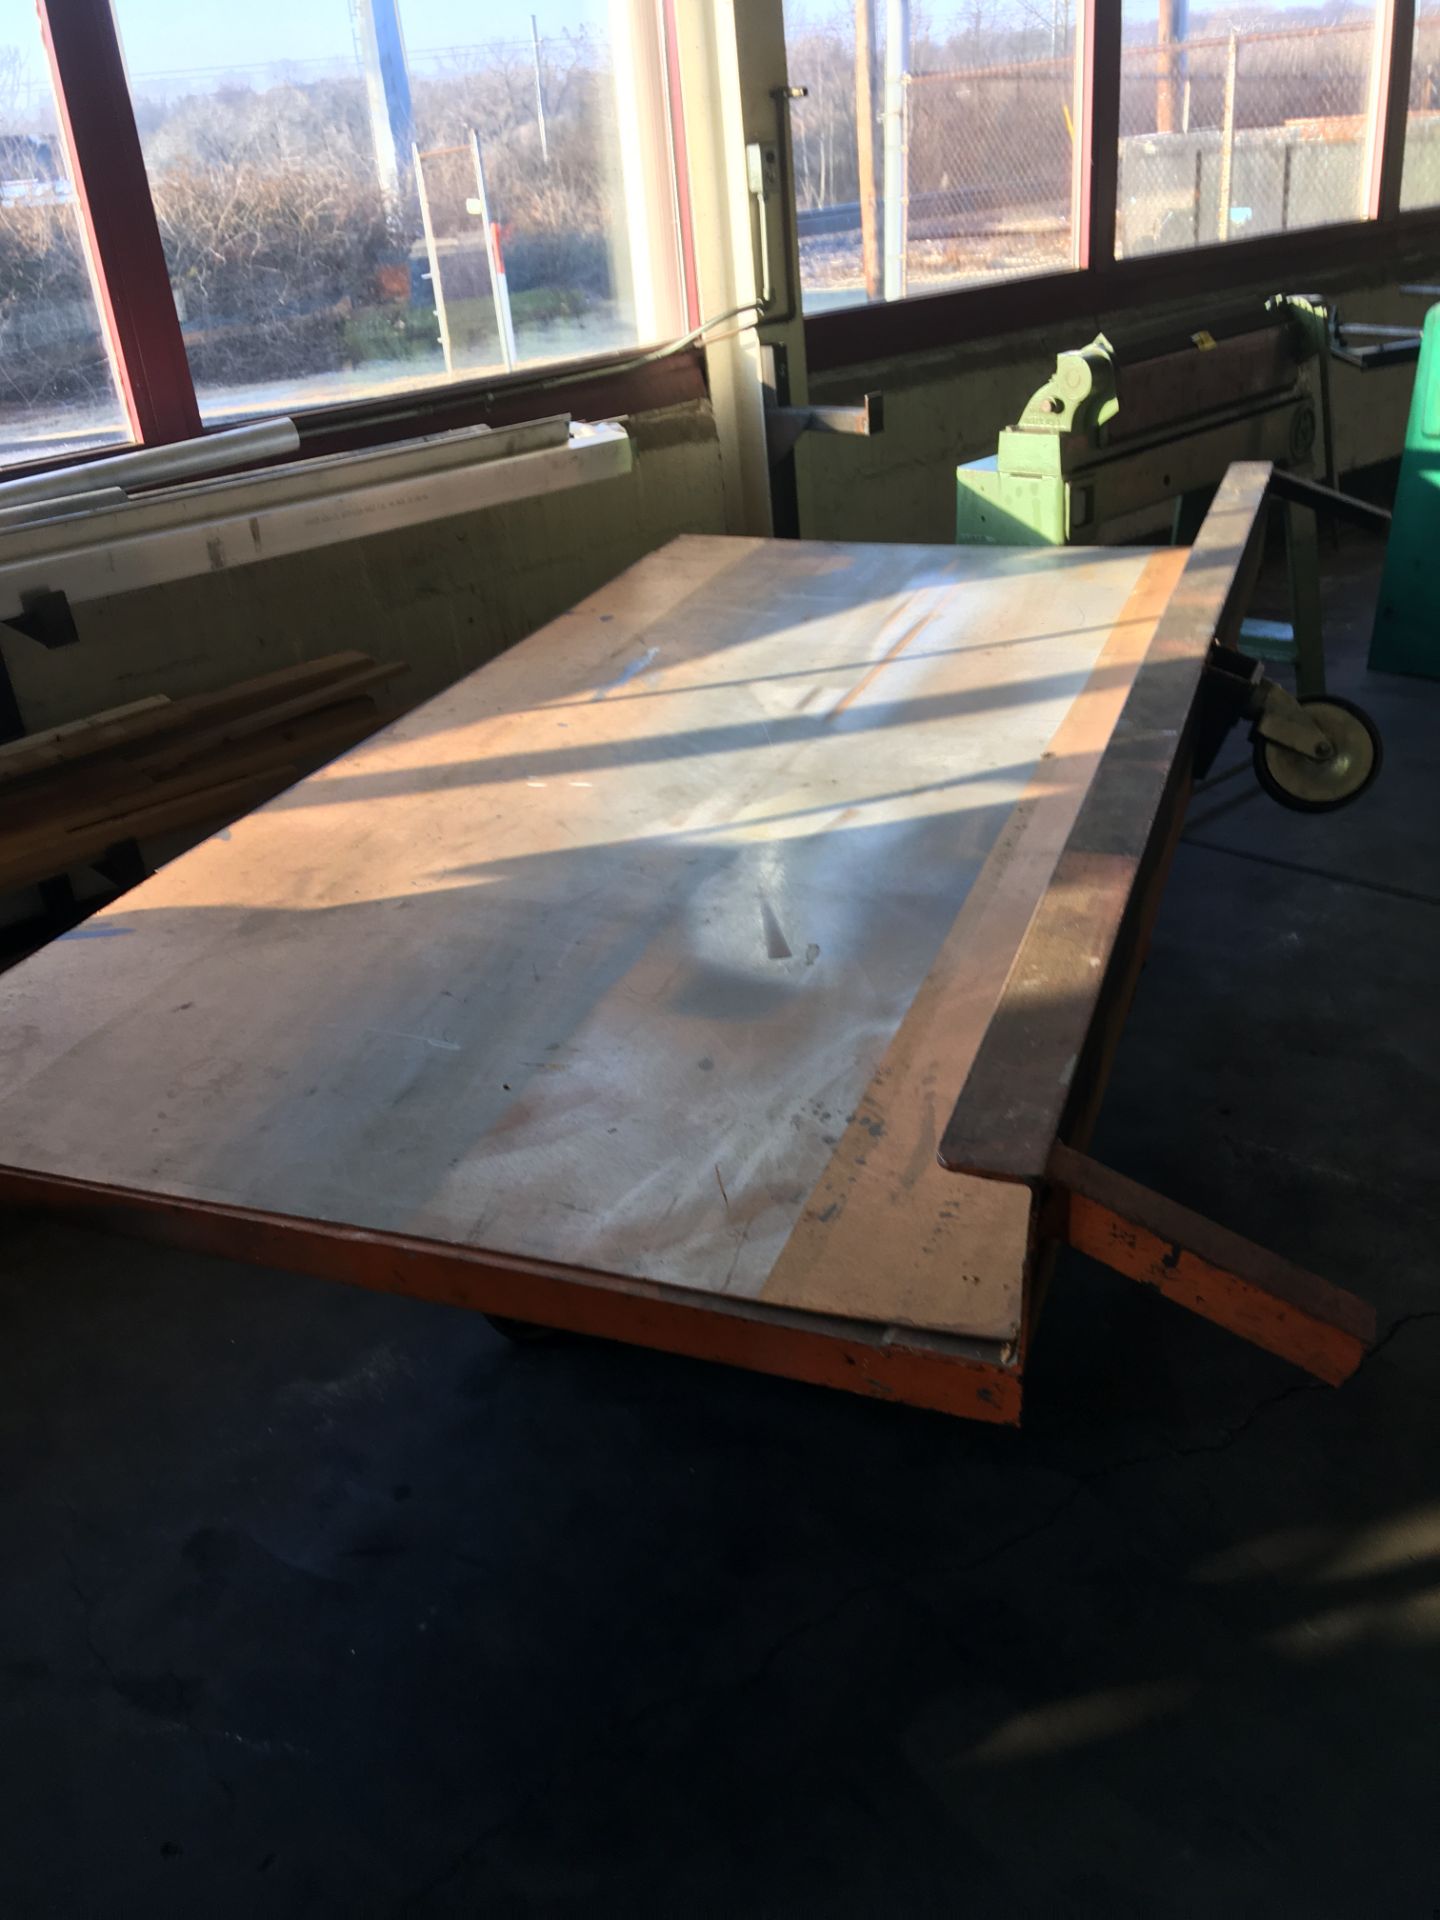 Inclinable Sheet Metal Table, 5' x 10' - Image 2 of 2